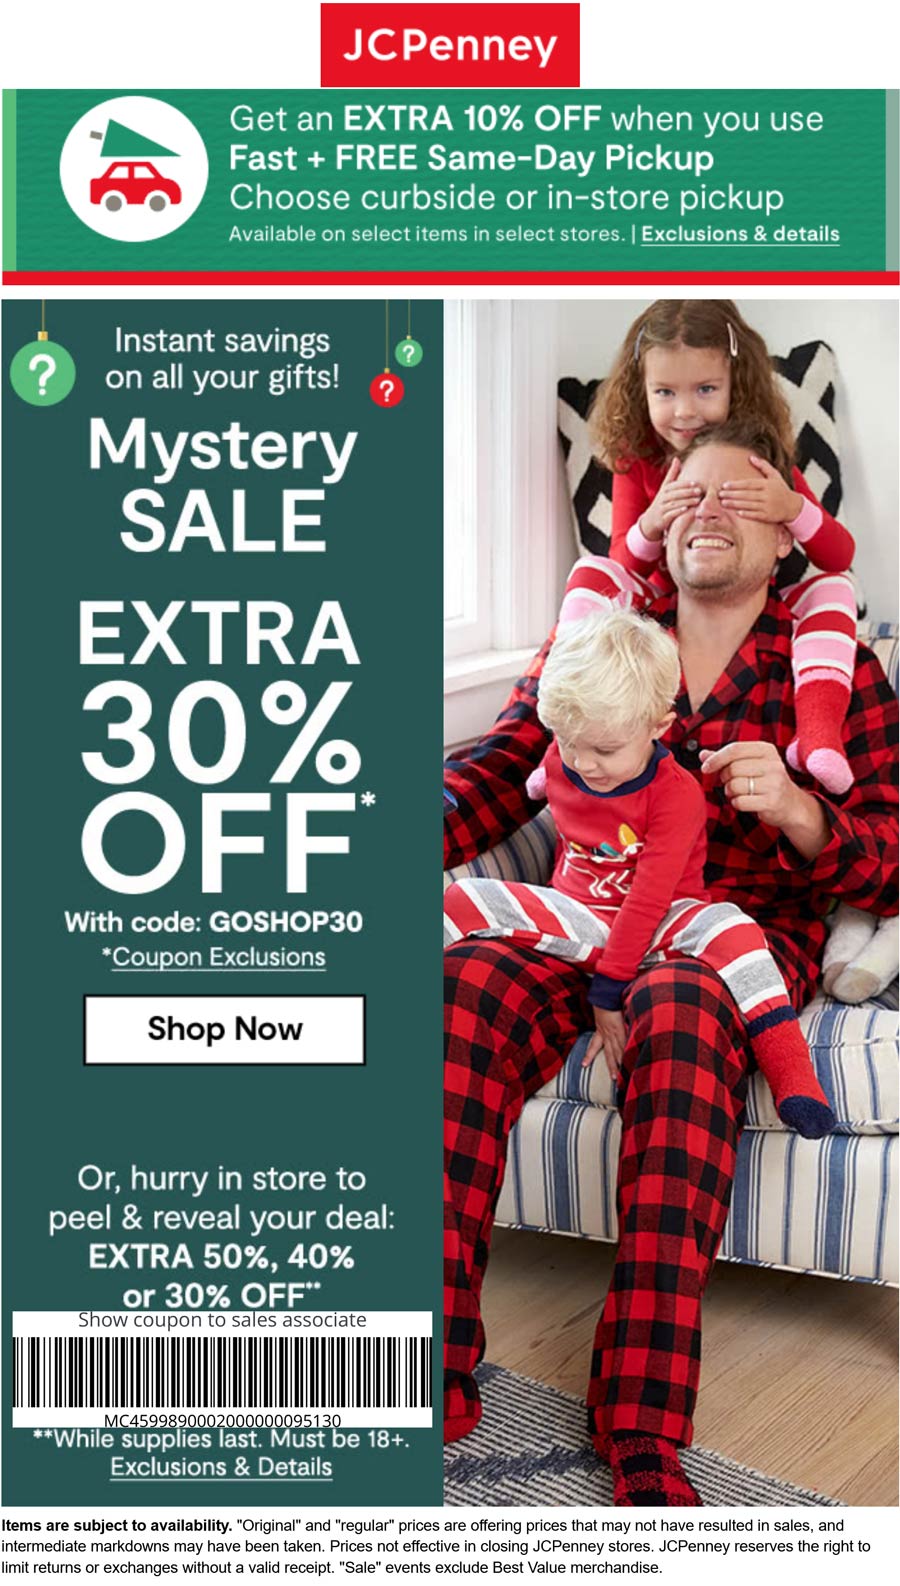 JCPenney stores Coupon  Extra 30% off at JCPenney, or online via promo code GOSHOP30 #jcpenney 